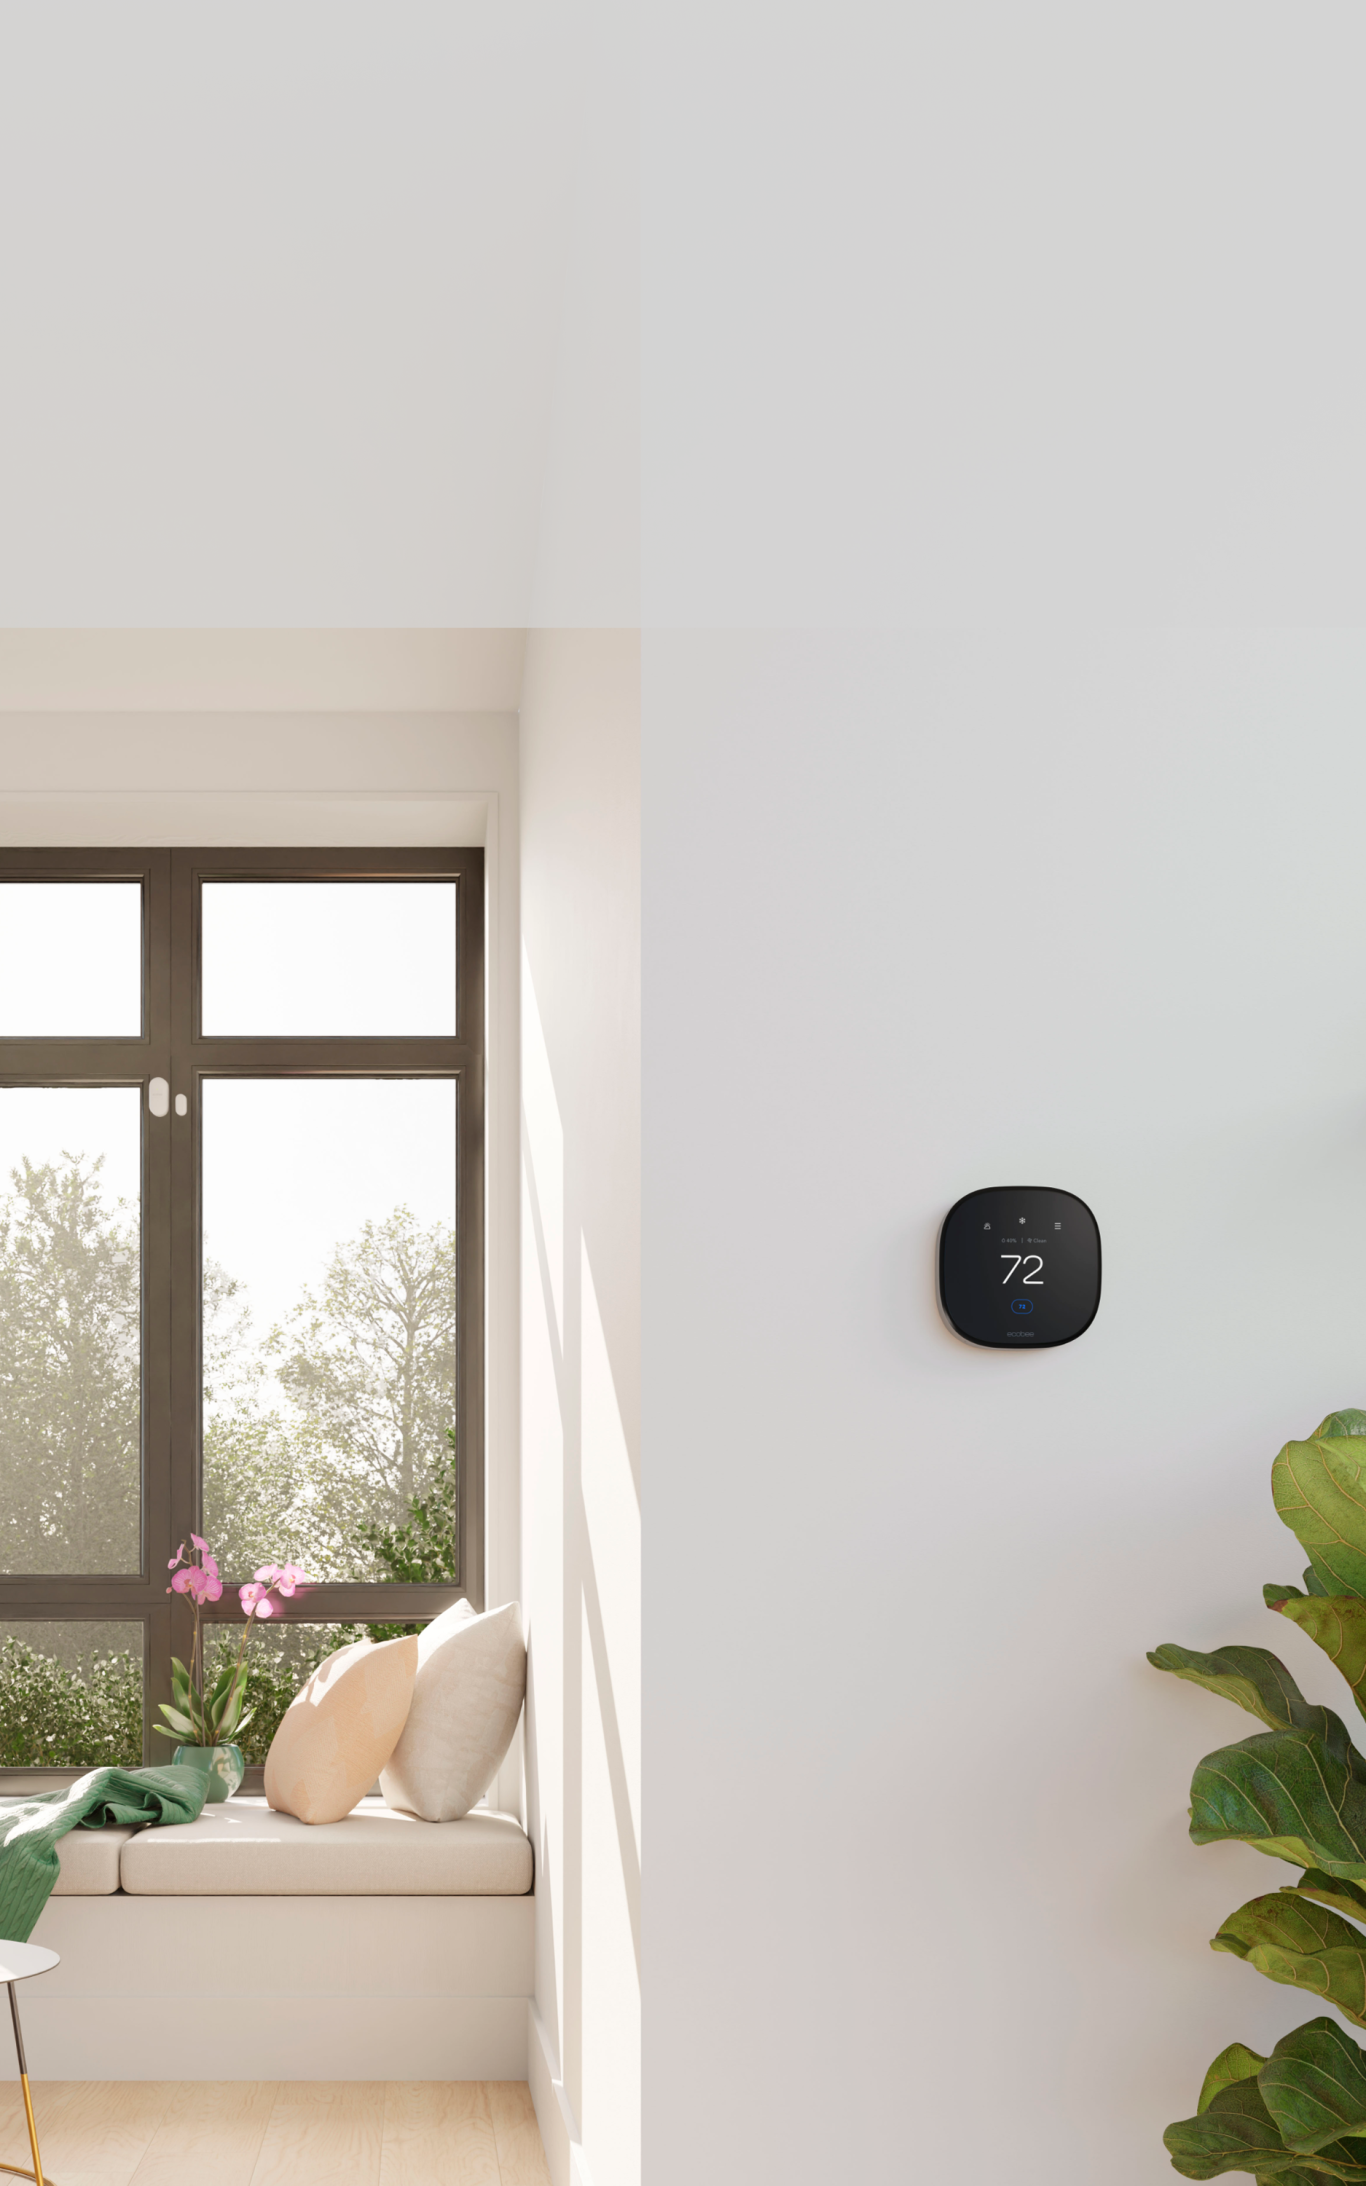 ecobee thermostat on a wall; a window showing a bright sunny day is nearby with an ecobee smartsensor for doors & windows